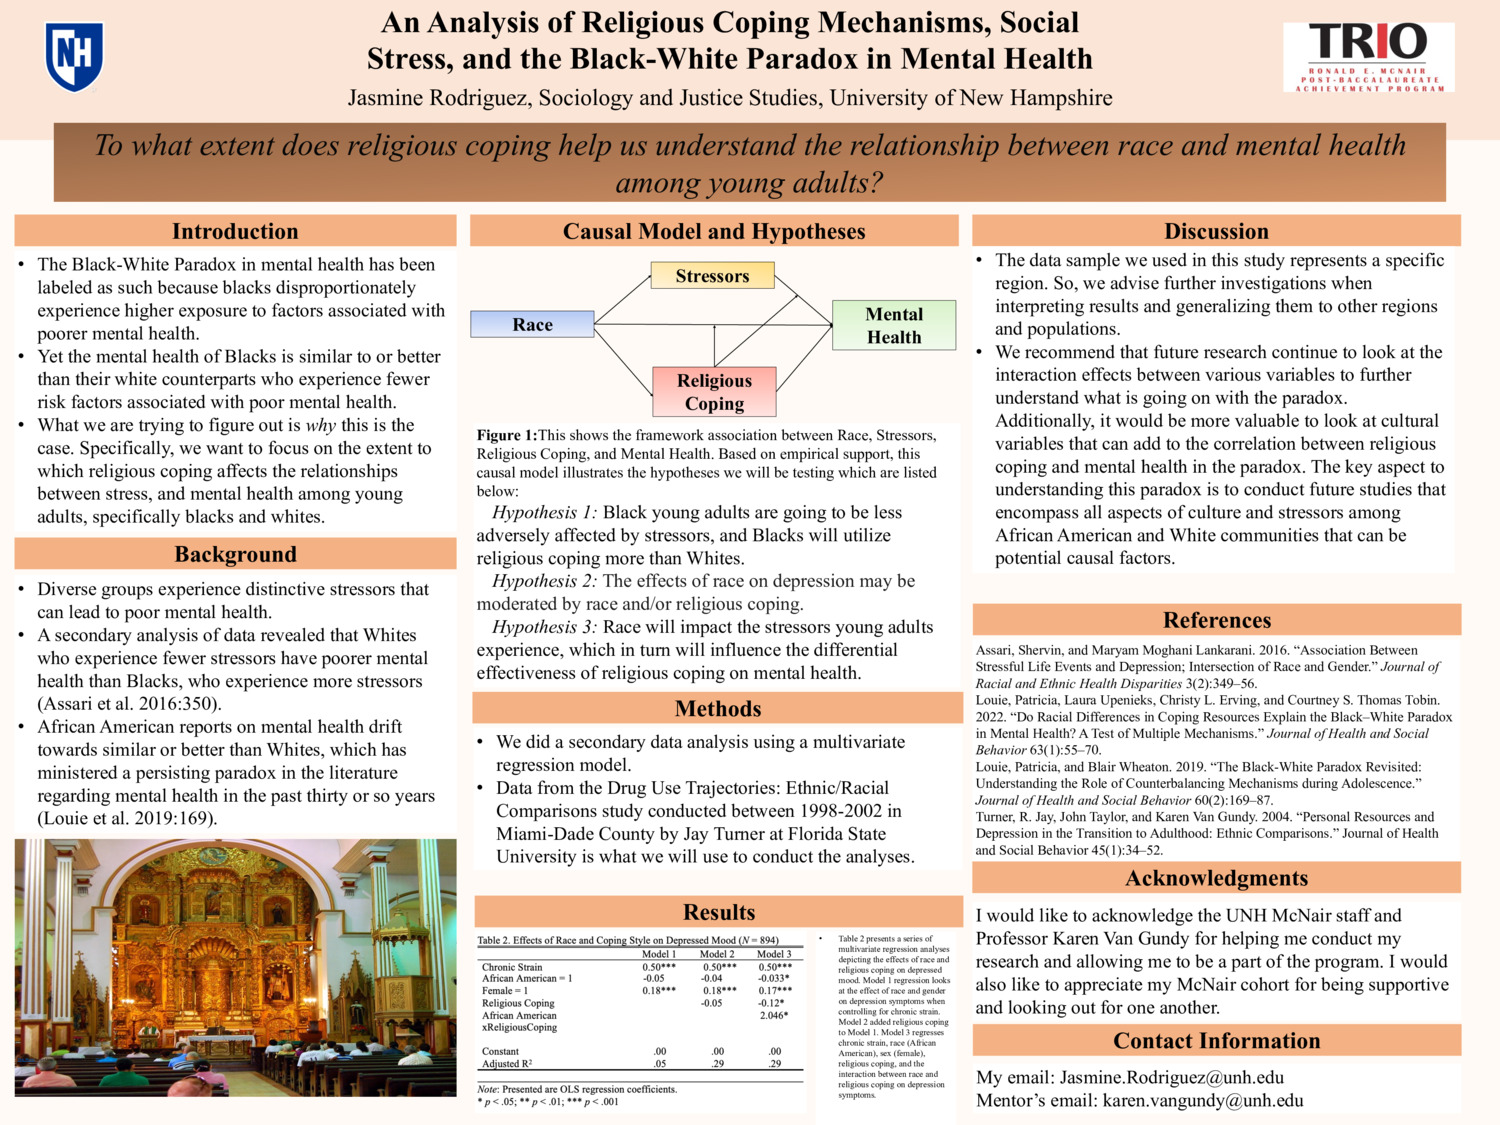 An Analysis Of Religious Coping Mechanisms, Social Stress, And The Black-White Paradox In Mental Health by kea4